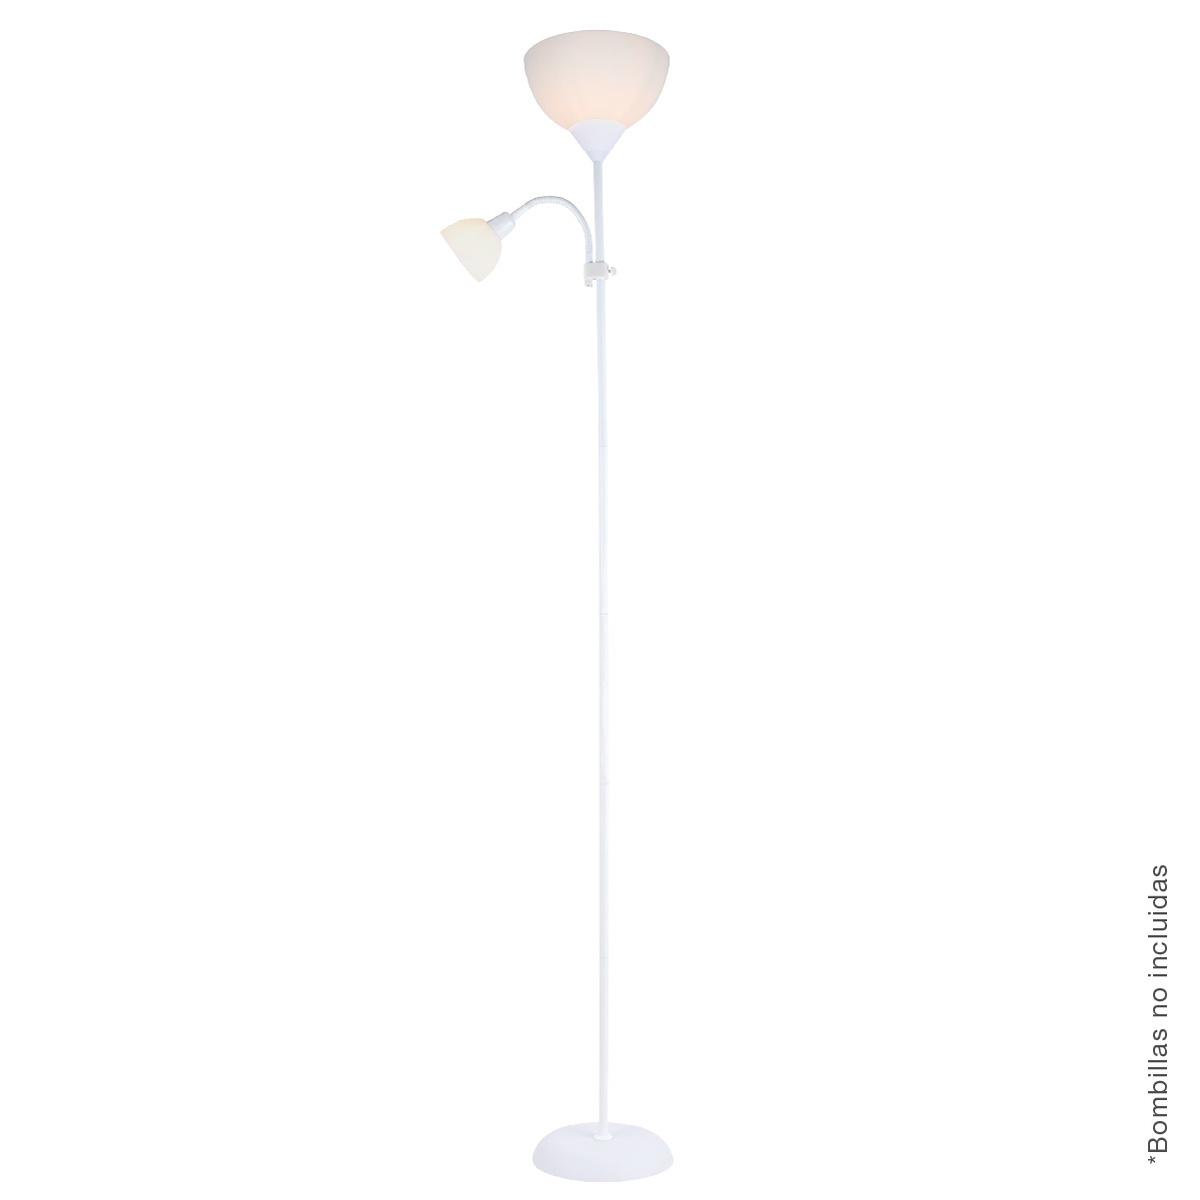 Nawis series floor lamp 1760mm E27 with reading lamp E14 white